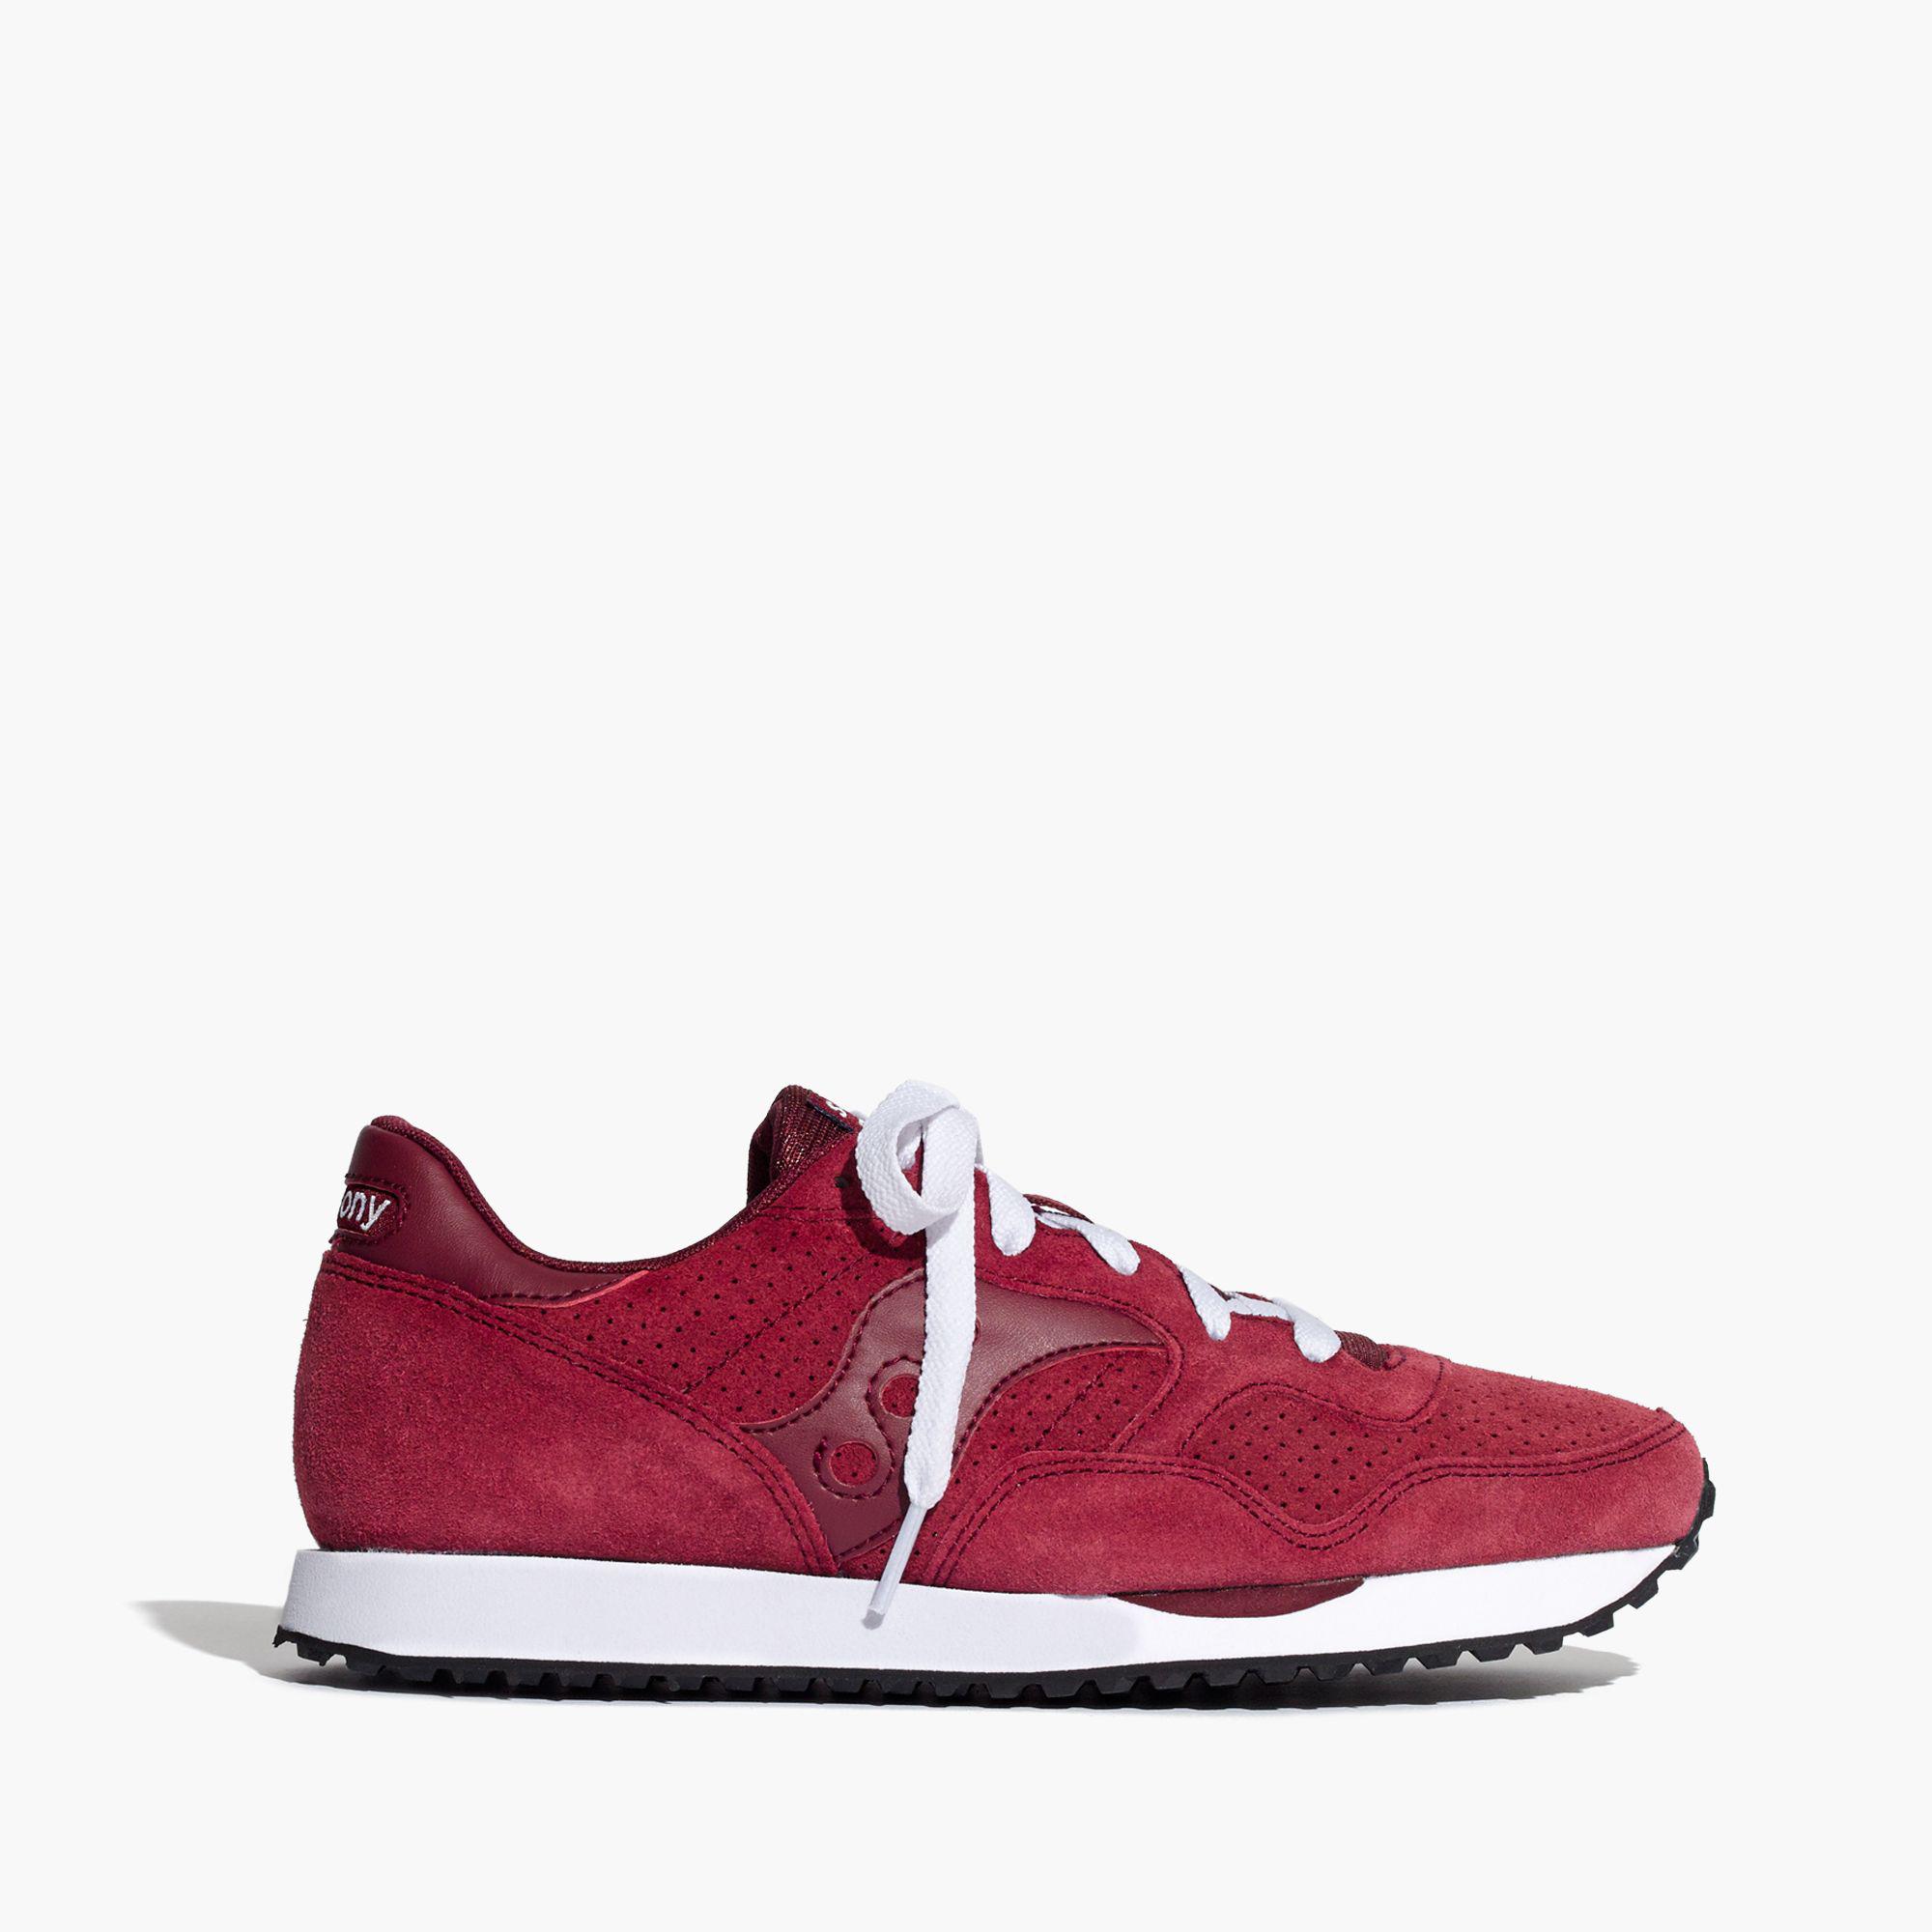 madewell saucony dxn trainers